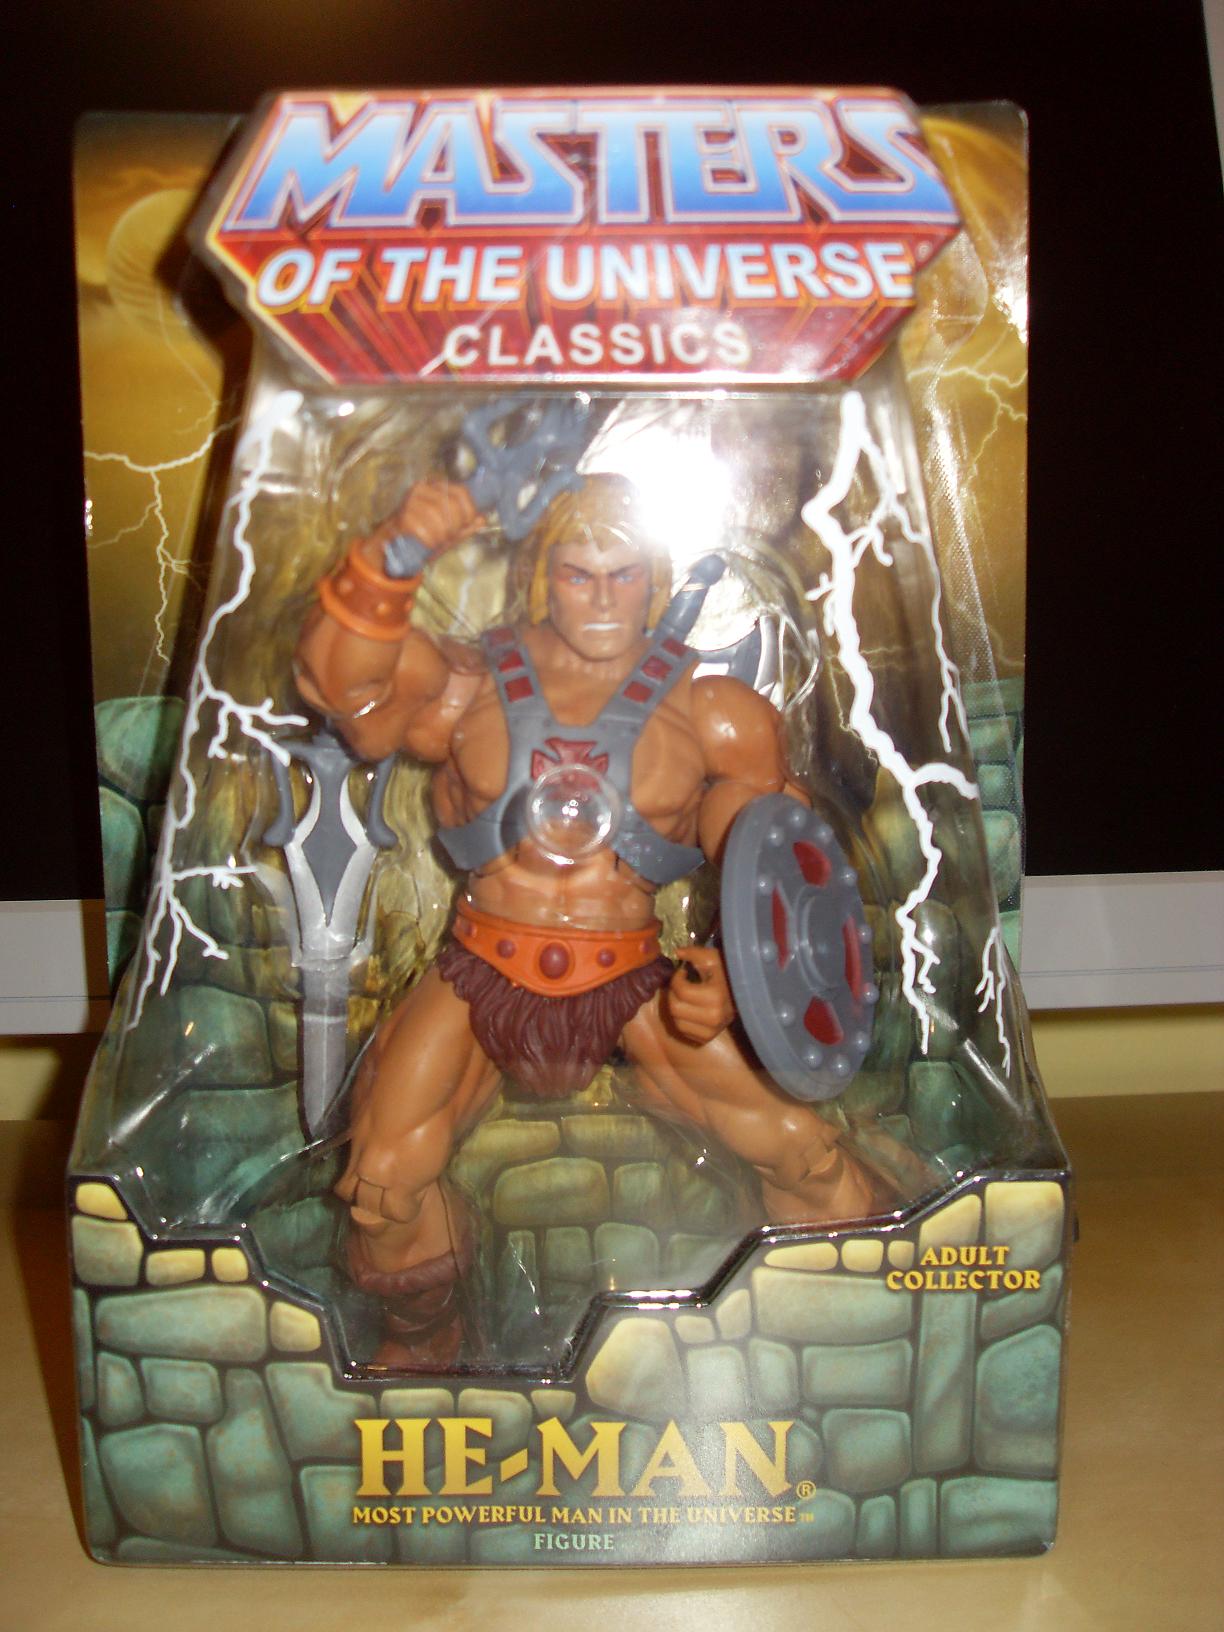 LORD HE-MAN Colecction 7982